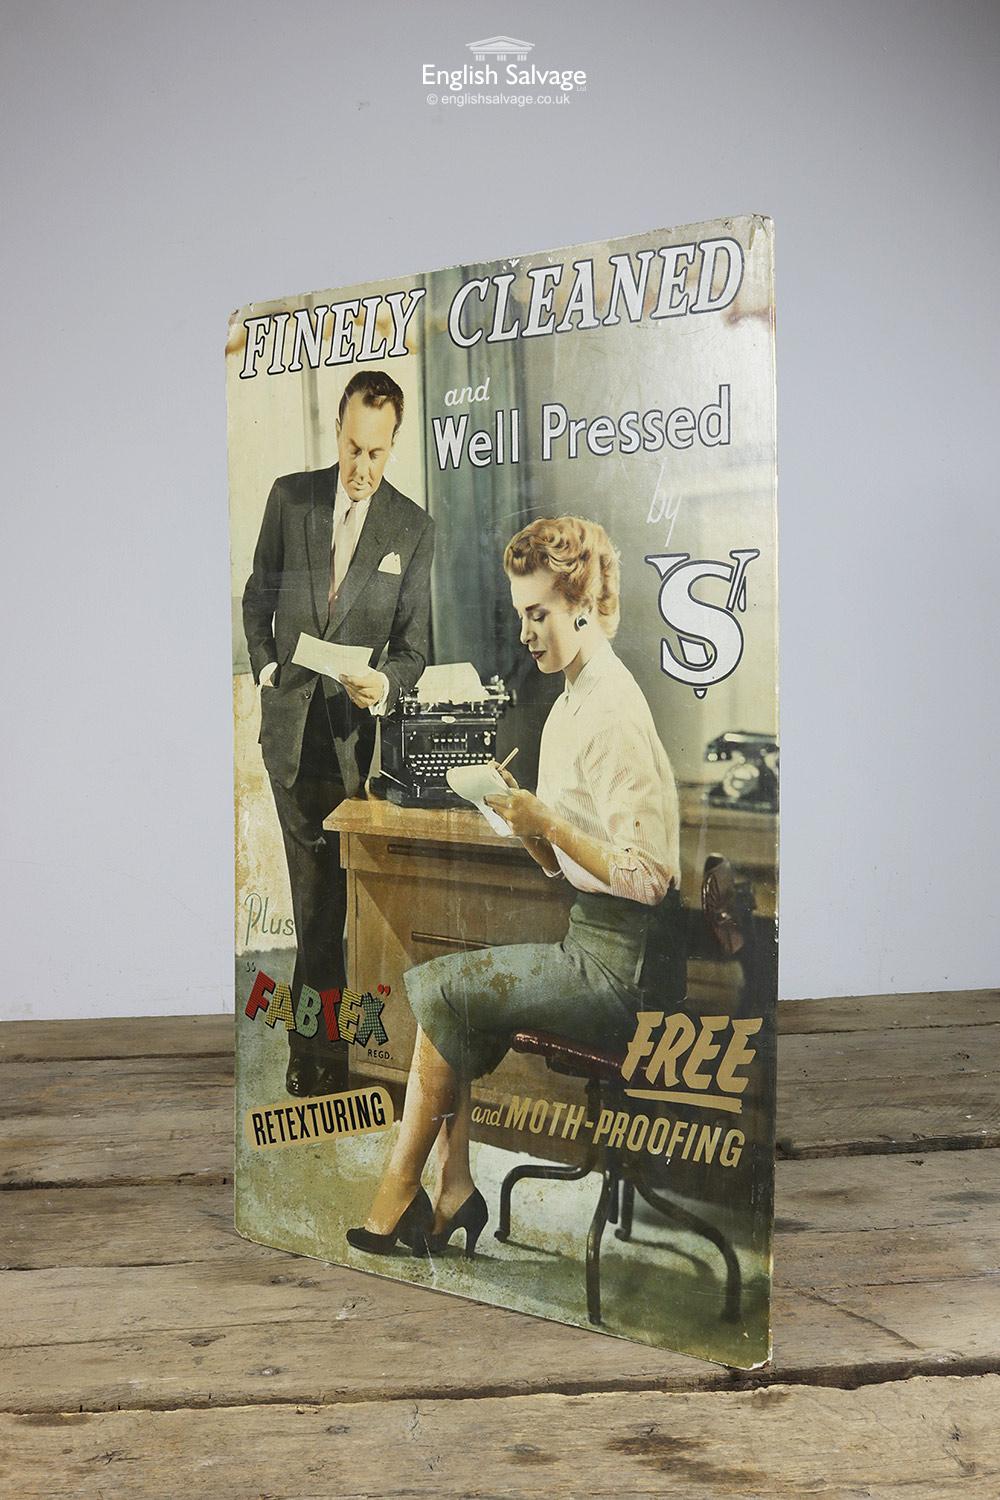 Paper Vintage V S Fabtex Dry Cleaning Poster, 20th Century For Sale